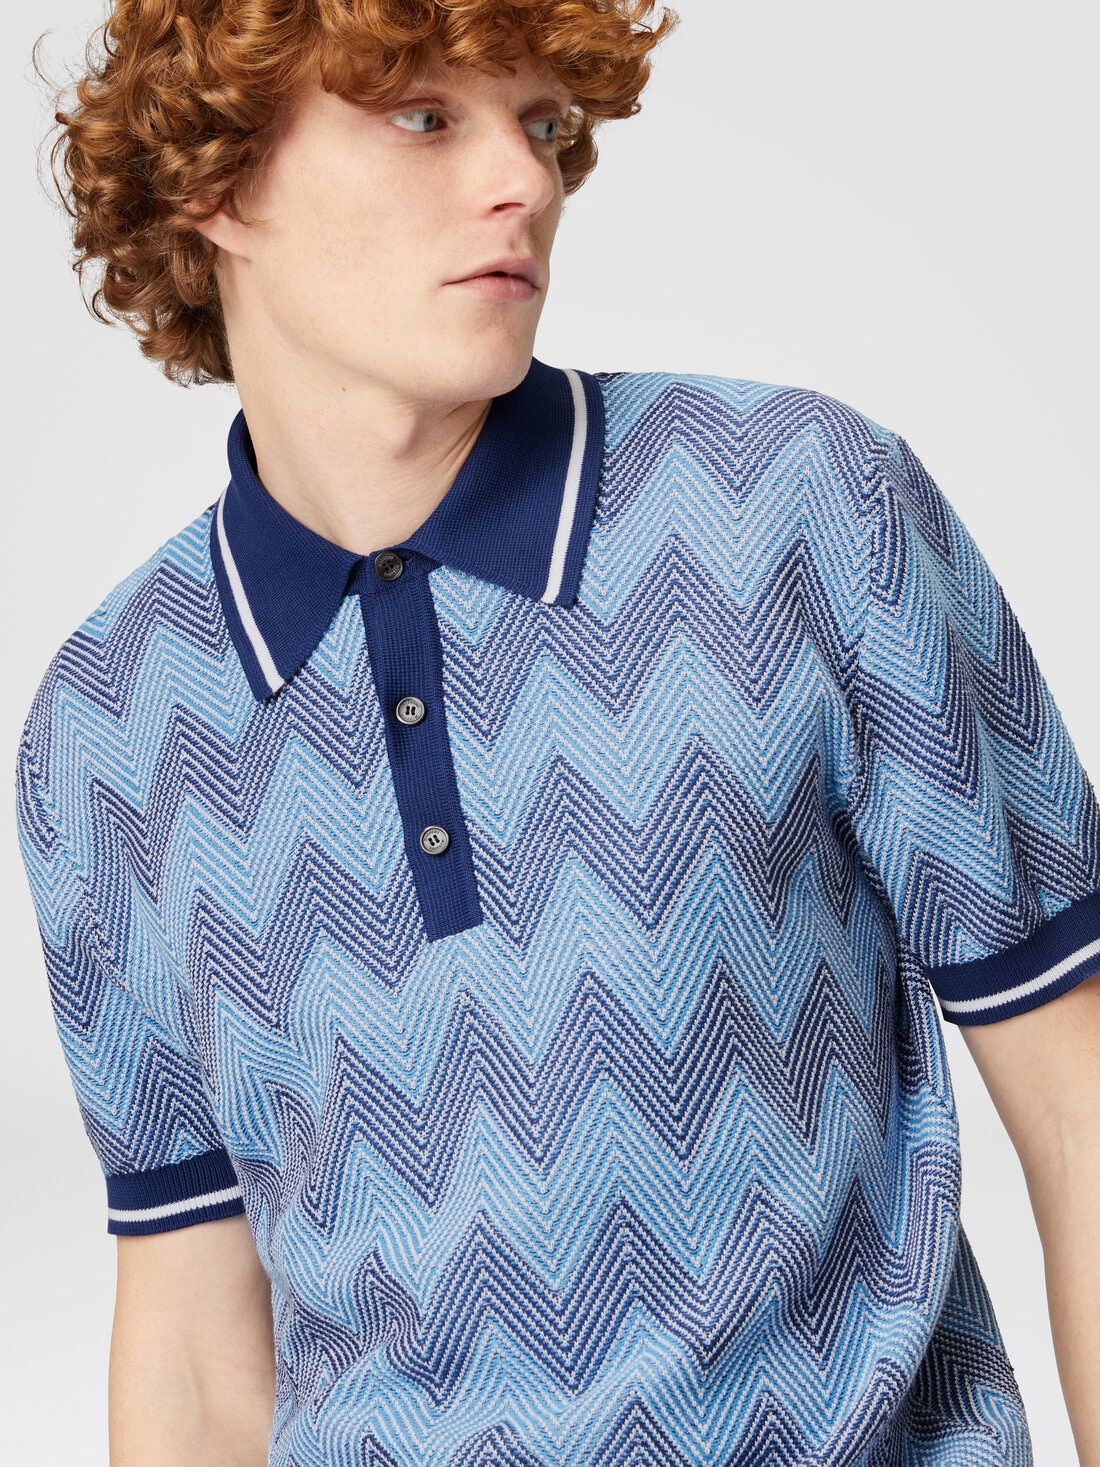 Short-sleeved polo shirt in zigzag cotton with contrasting trim, Blue - US24S209BK034YS72F8 - 4